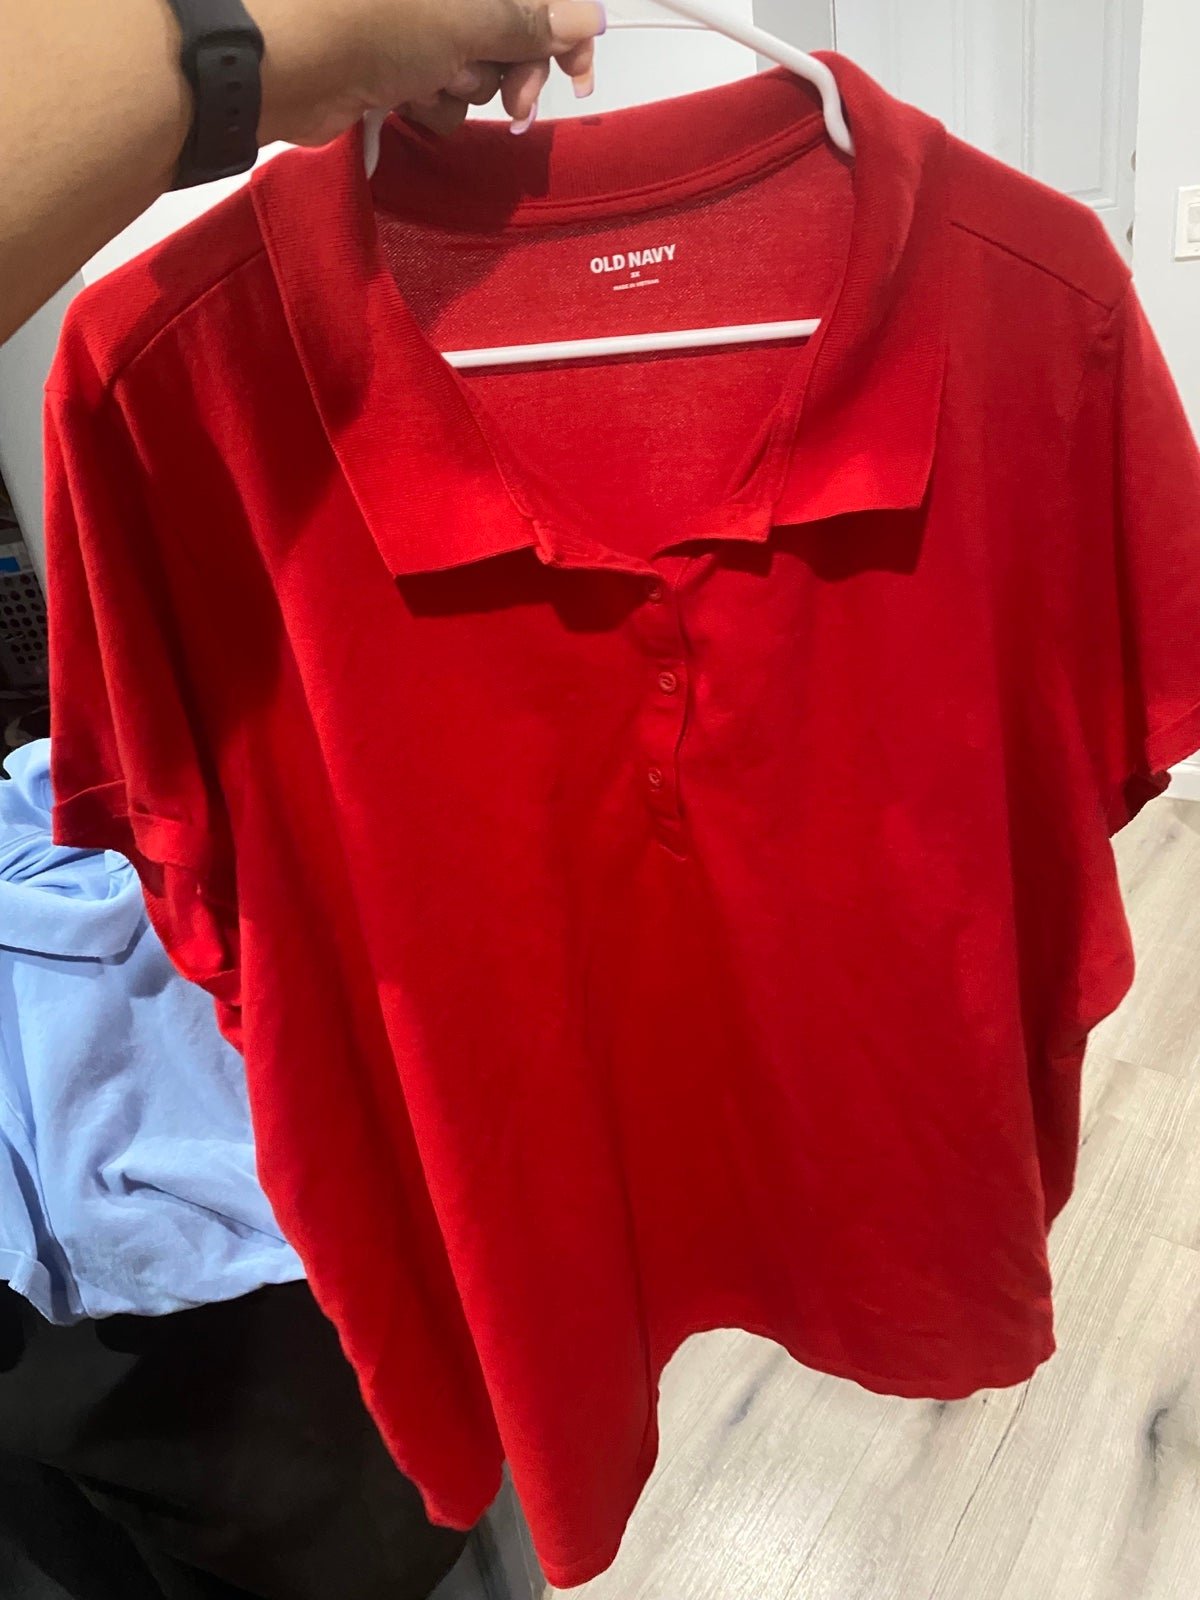 Wholesale price Red Old Navy Uniform Pique Polo for Wom